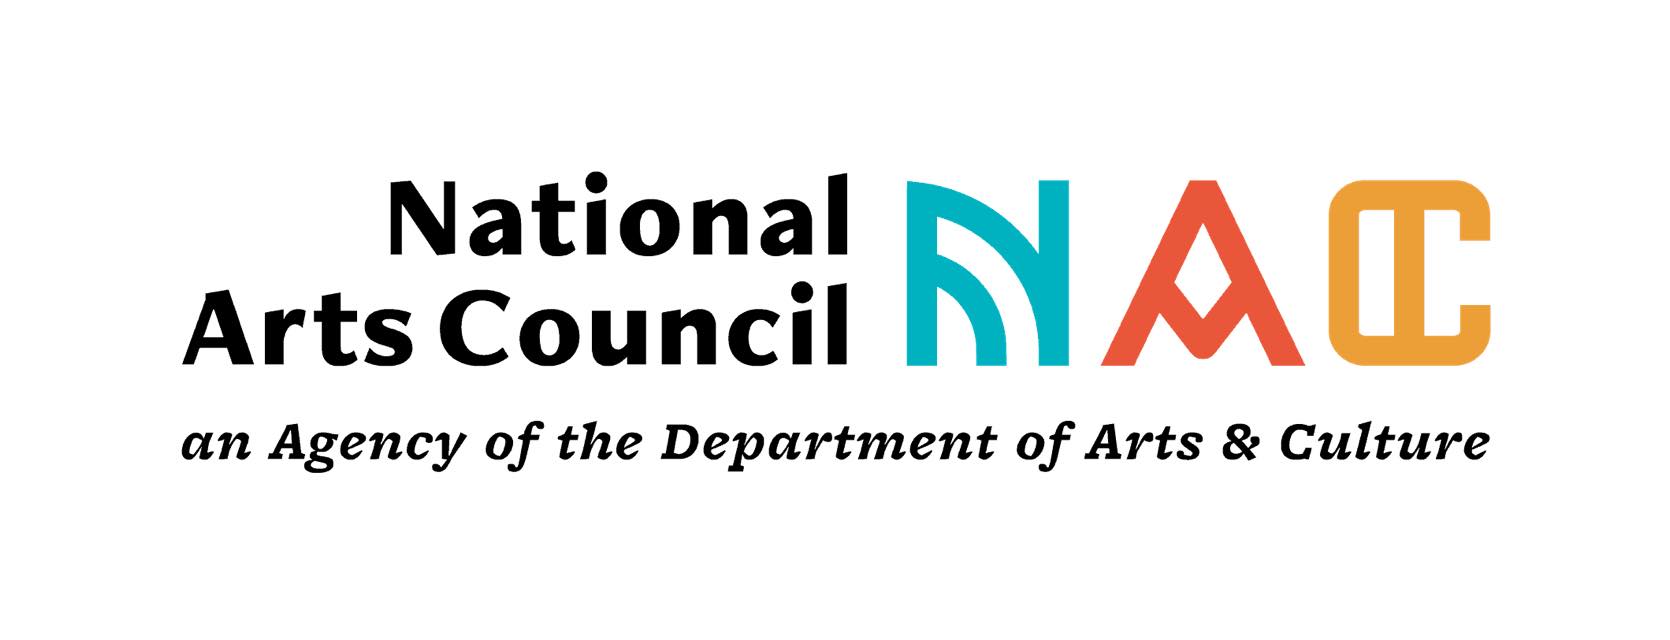 The National Arts Council